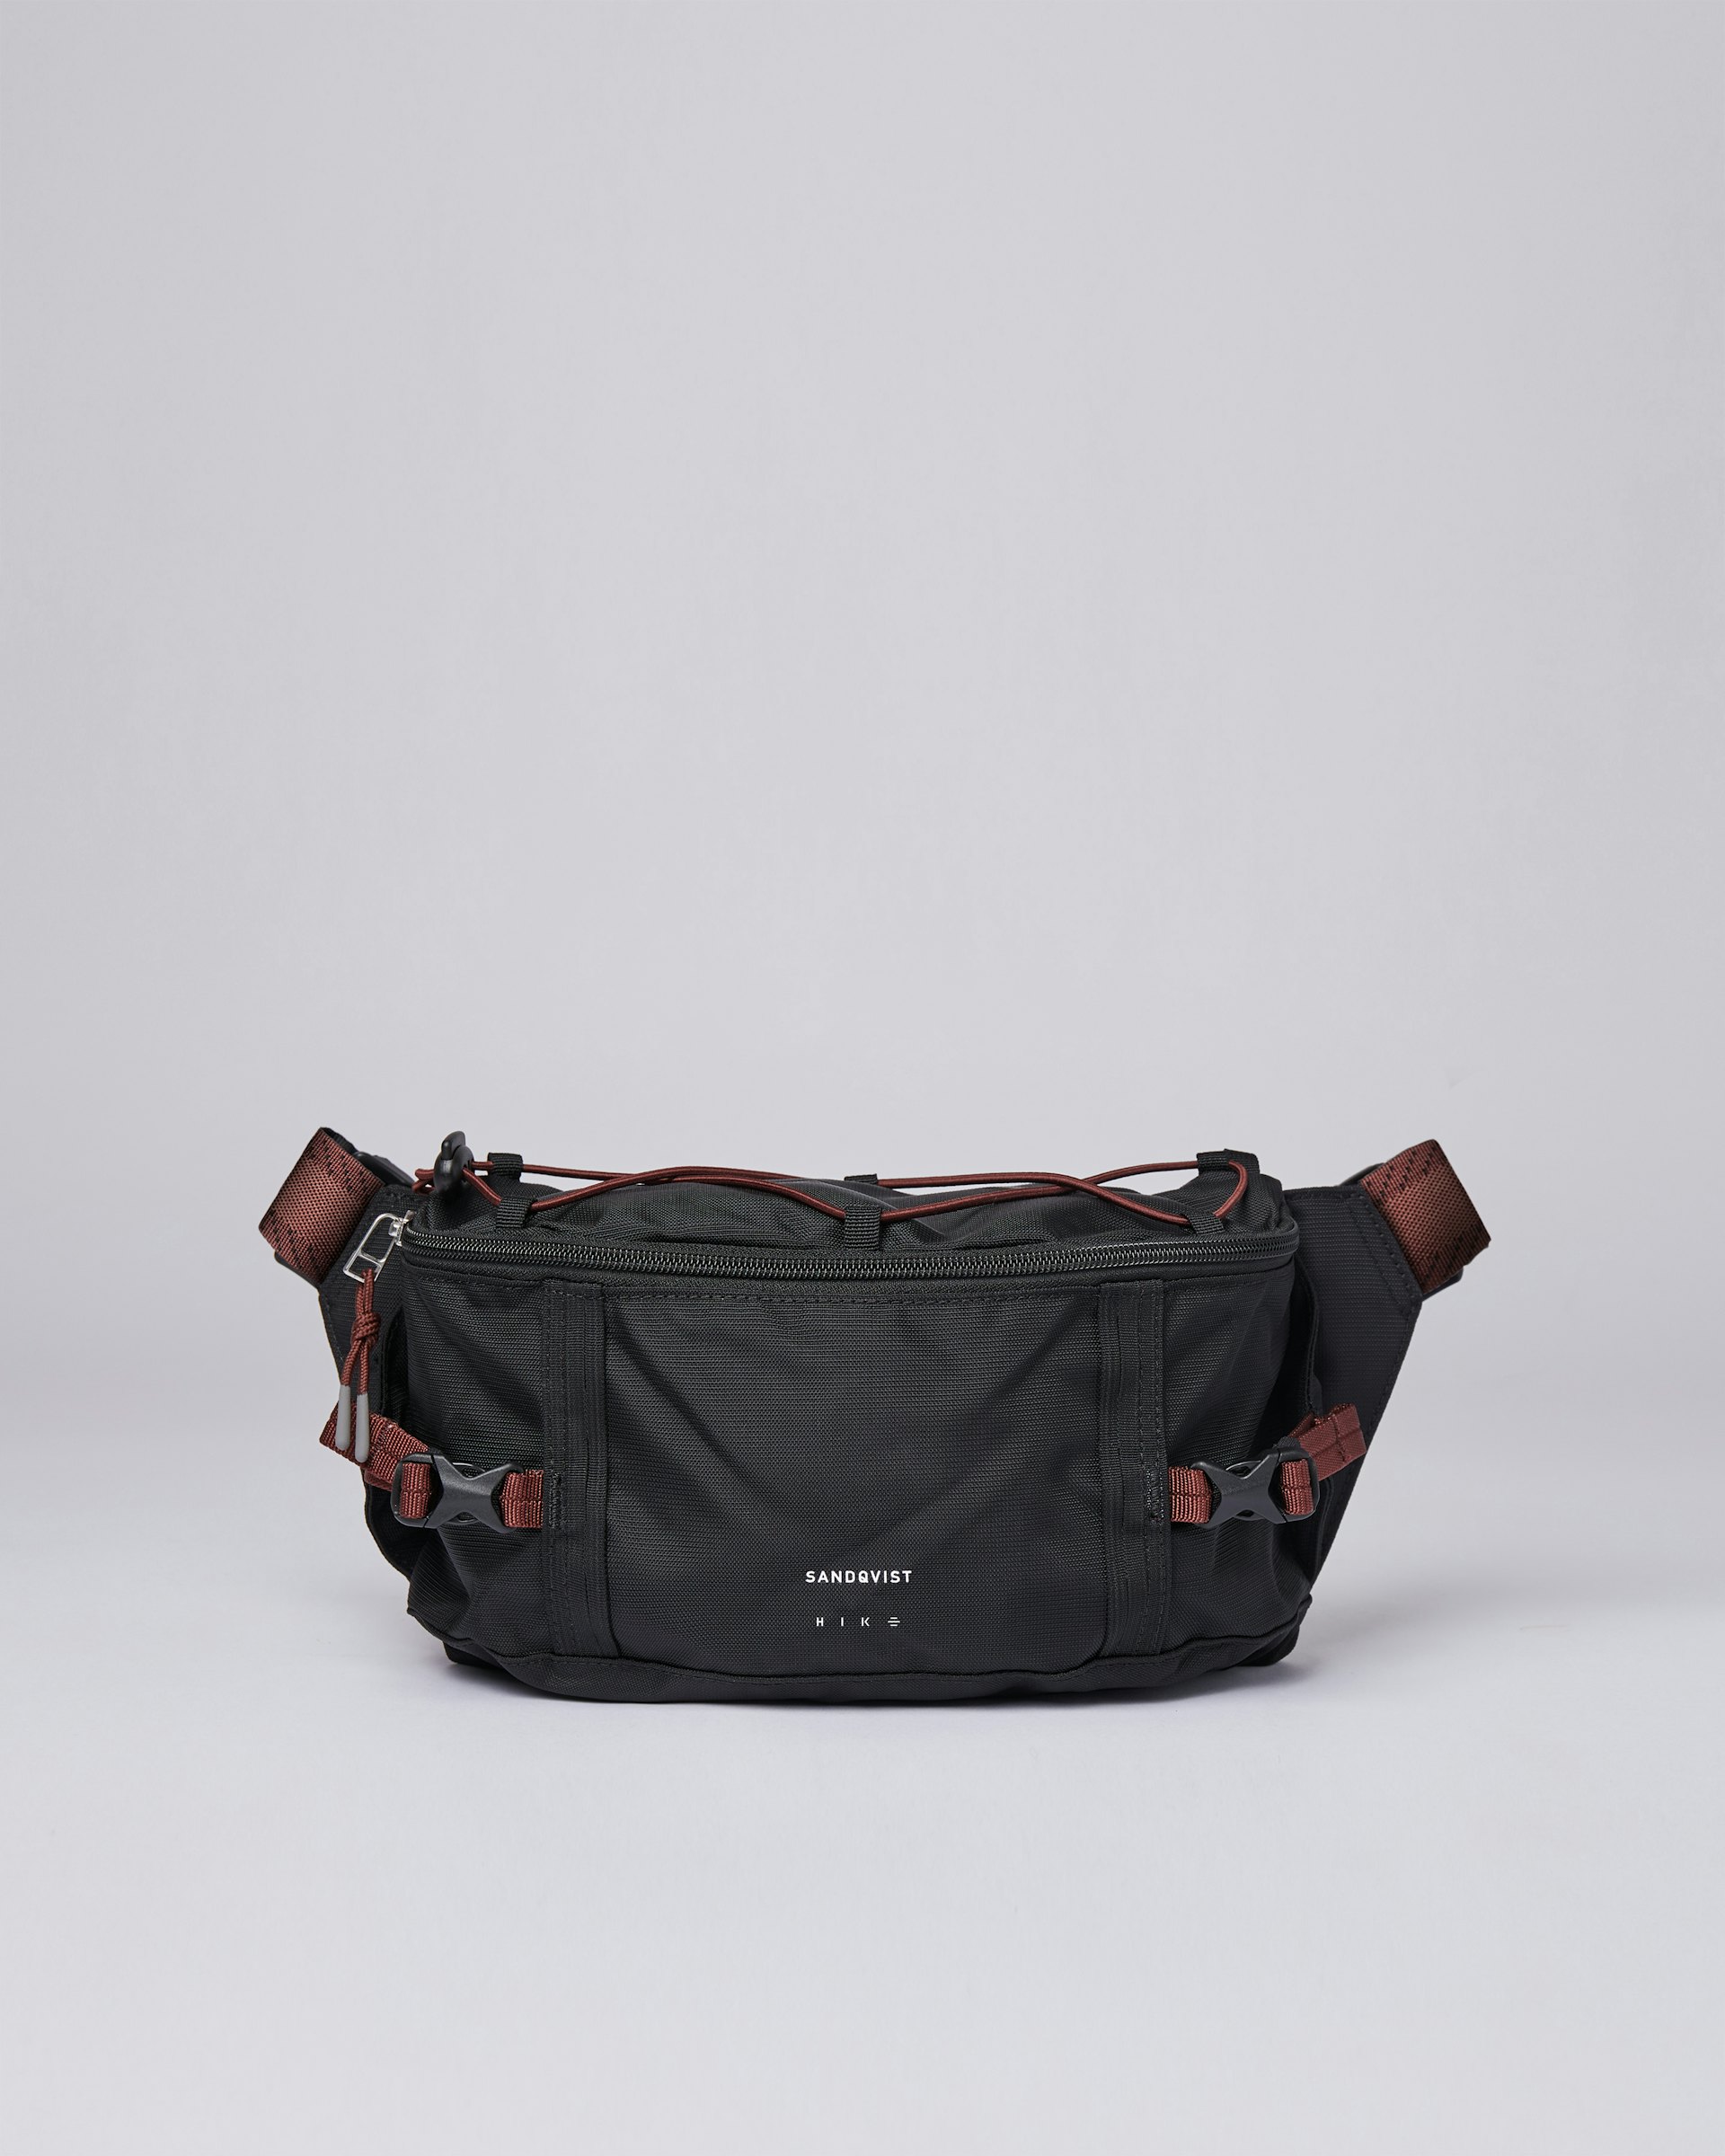 Allterrain Hike belongs to the category Bum bags and is in color black (1 of 7)